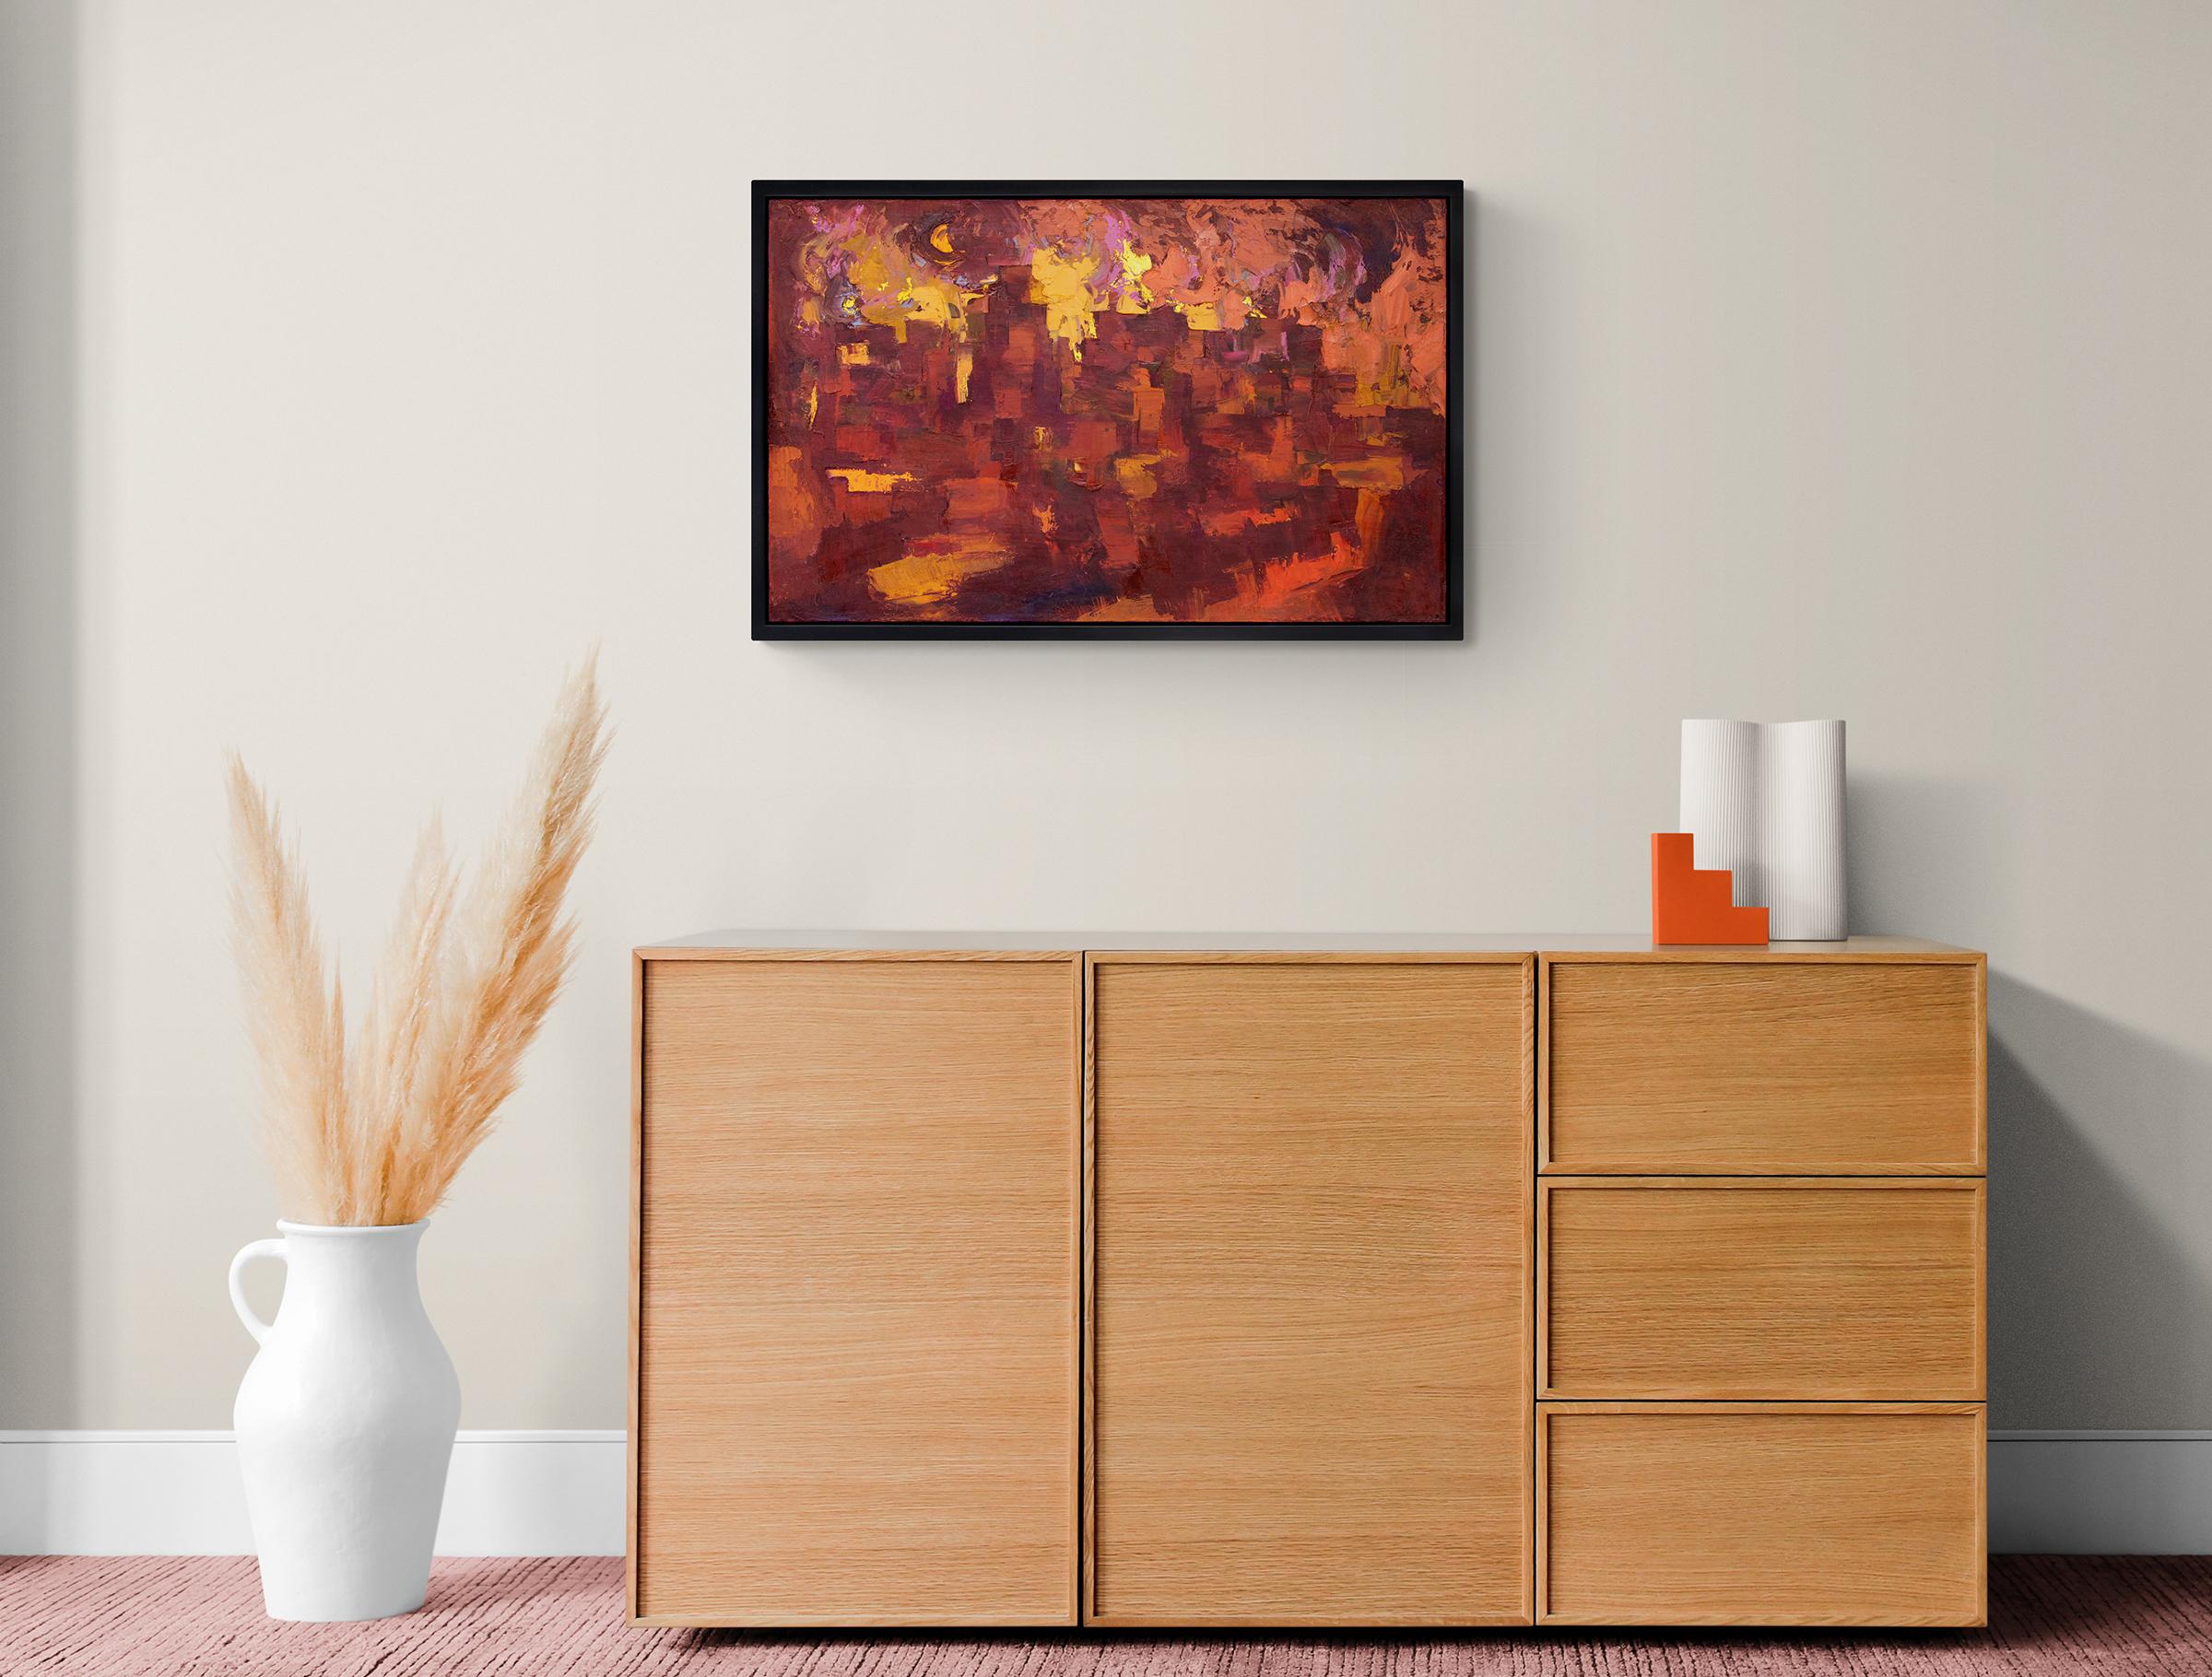 Taos Pueblo, Firelight, New Mexico, Semi Abstract Painting, Red Orange Yellow 6